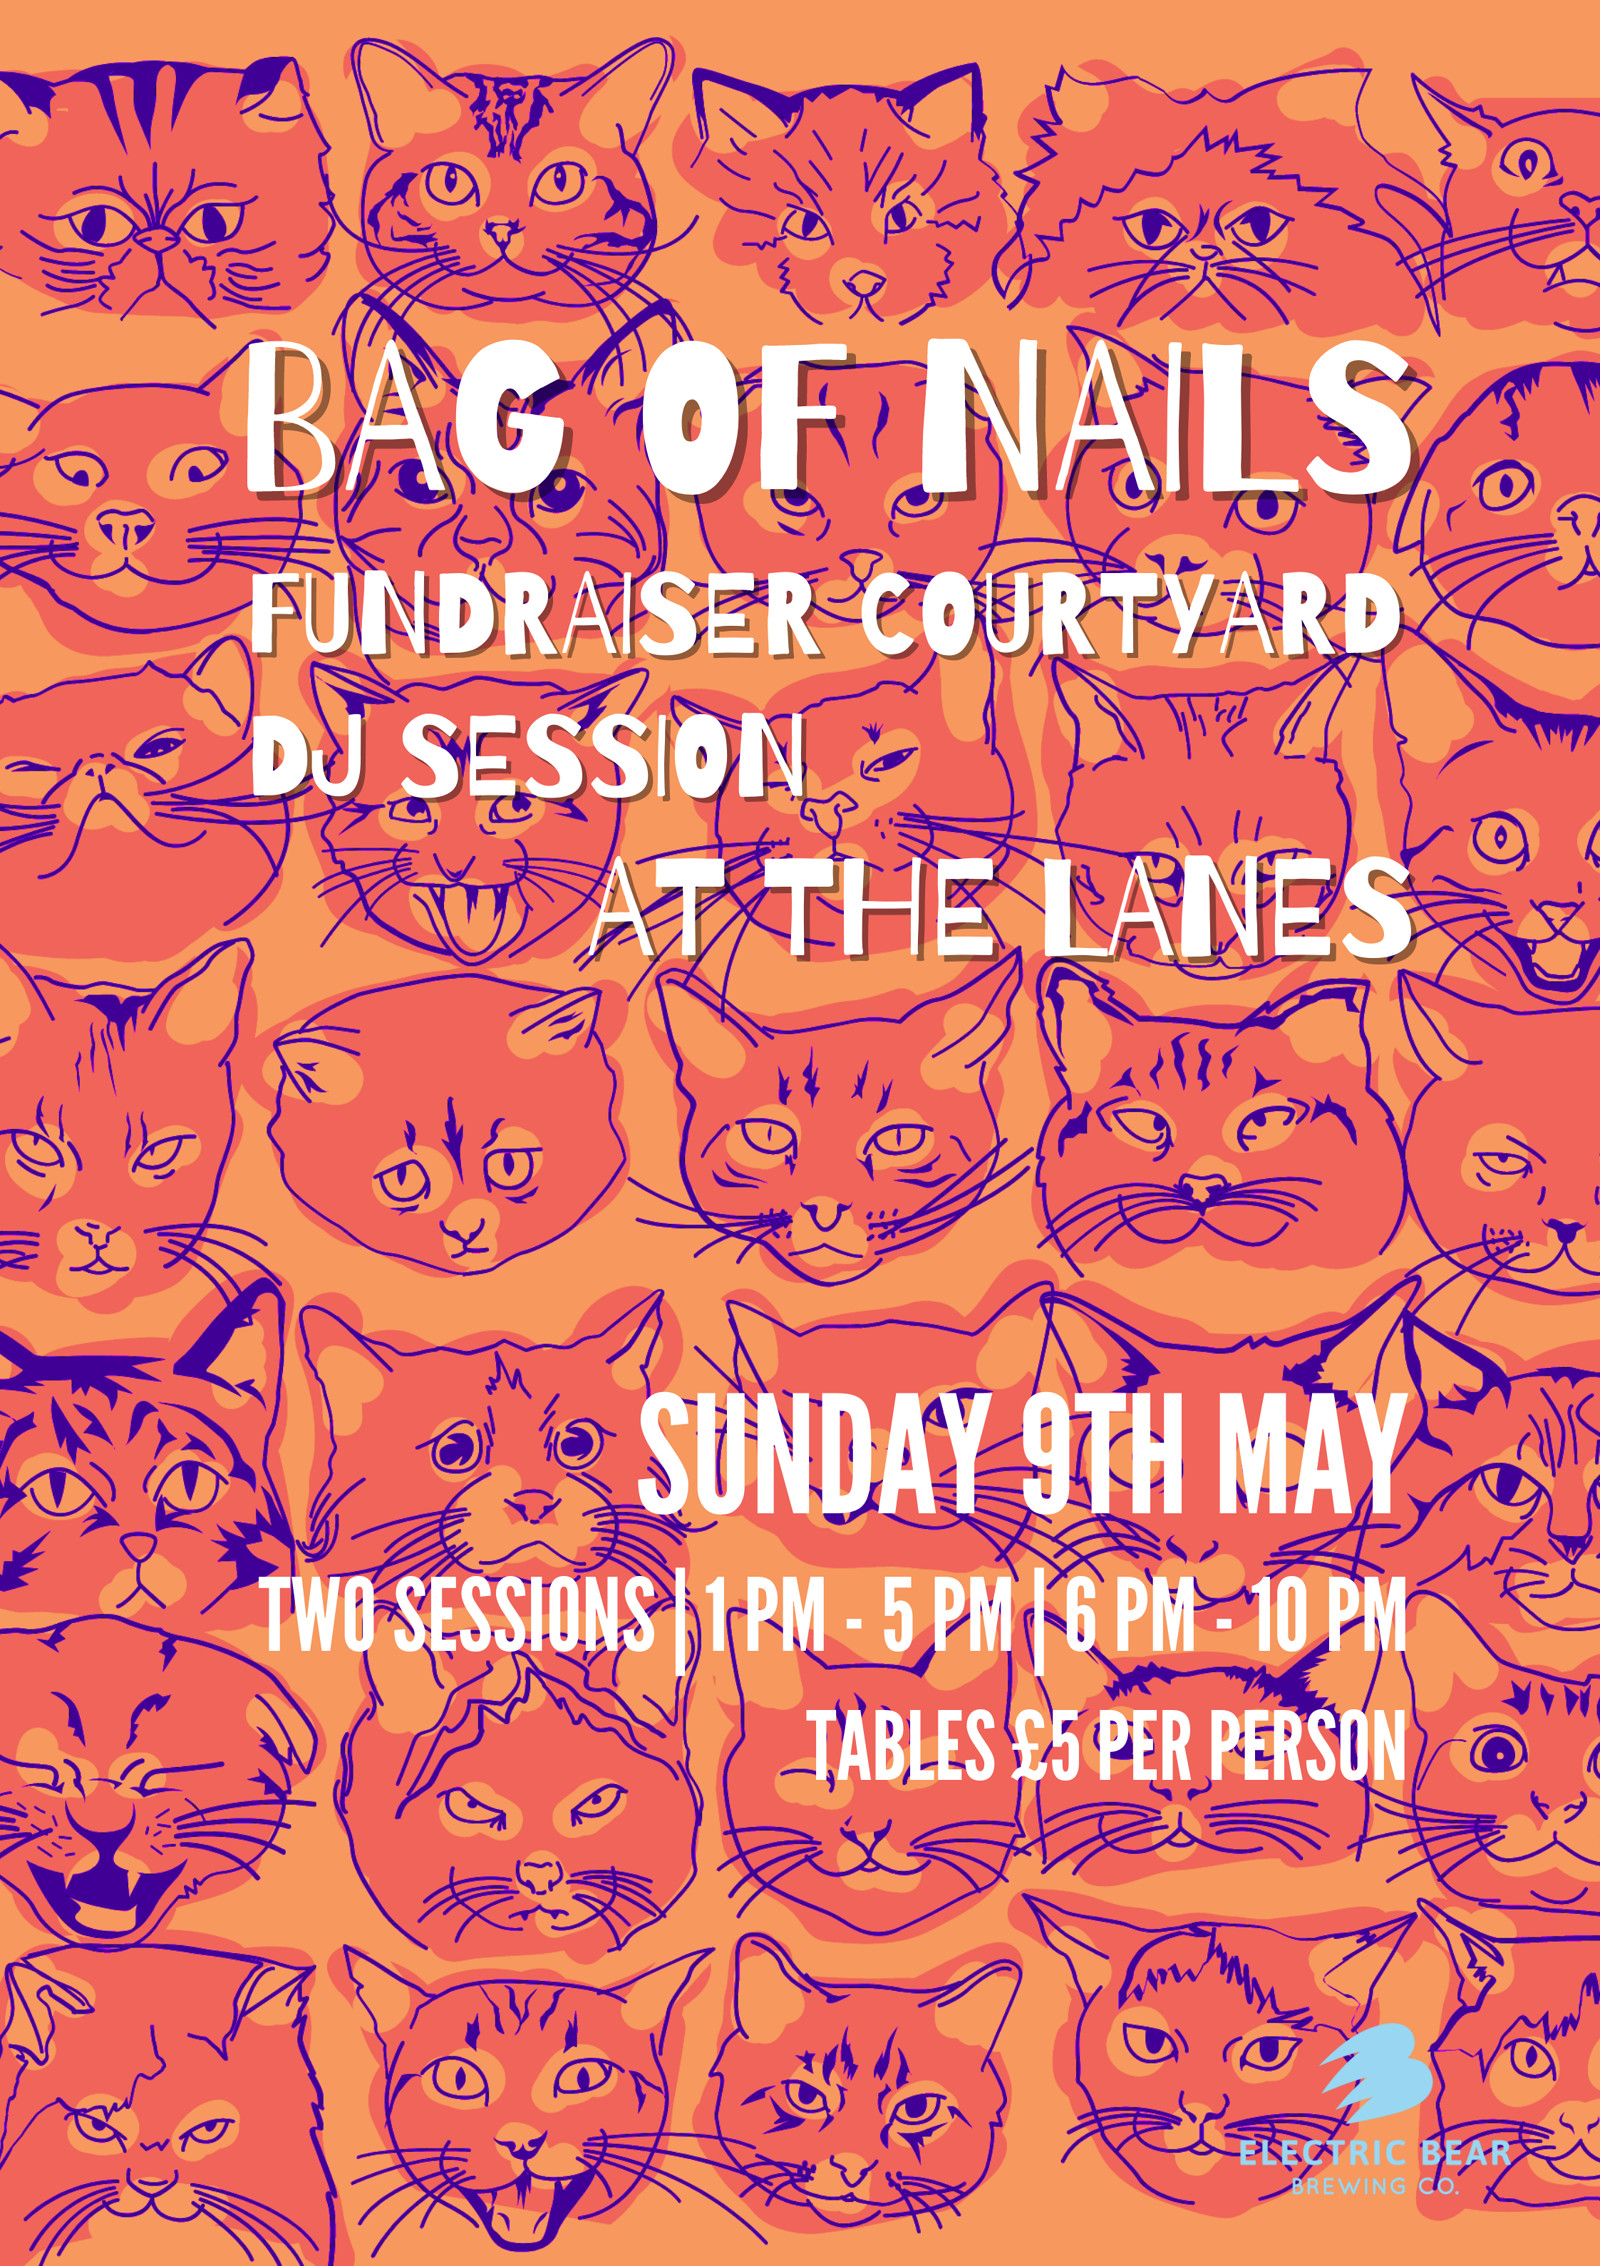 Bag Of Nails Fundraiser Courtyard DJ Session at The Lanes